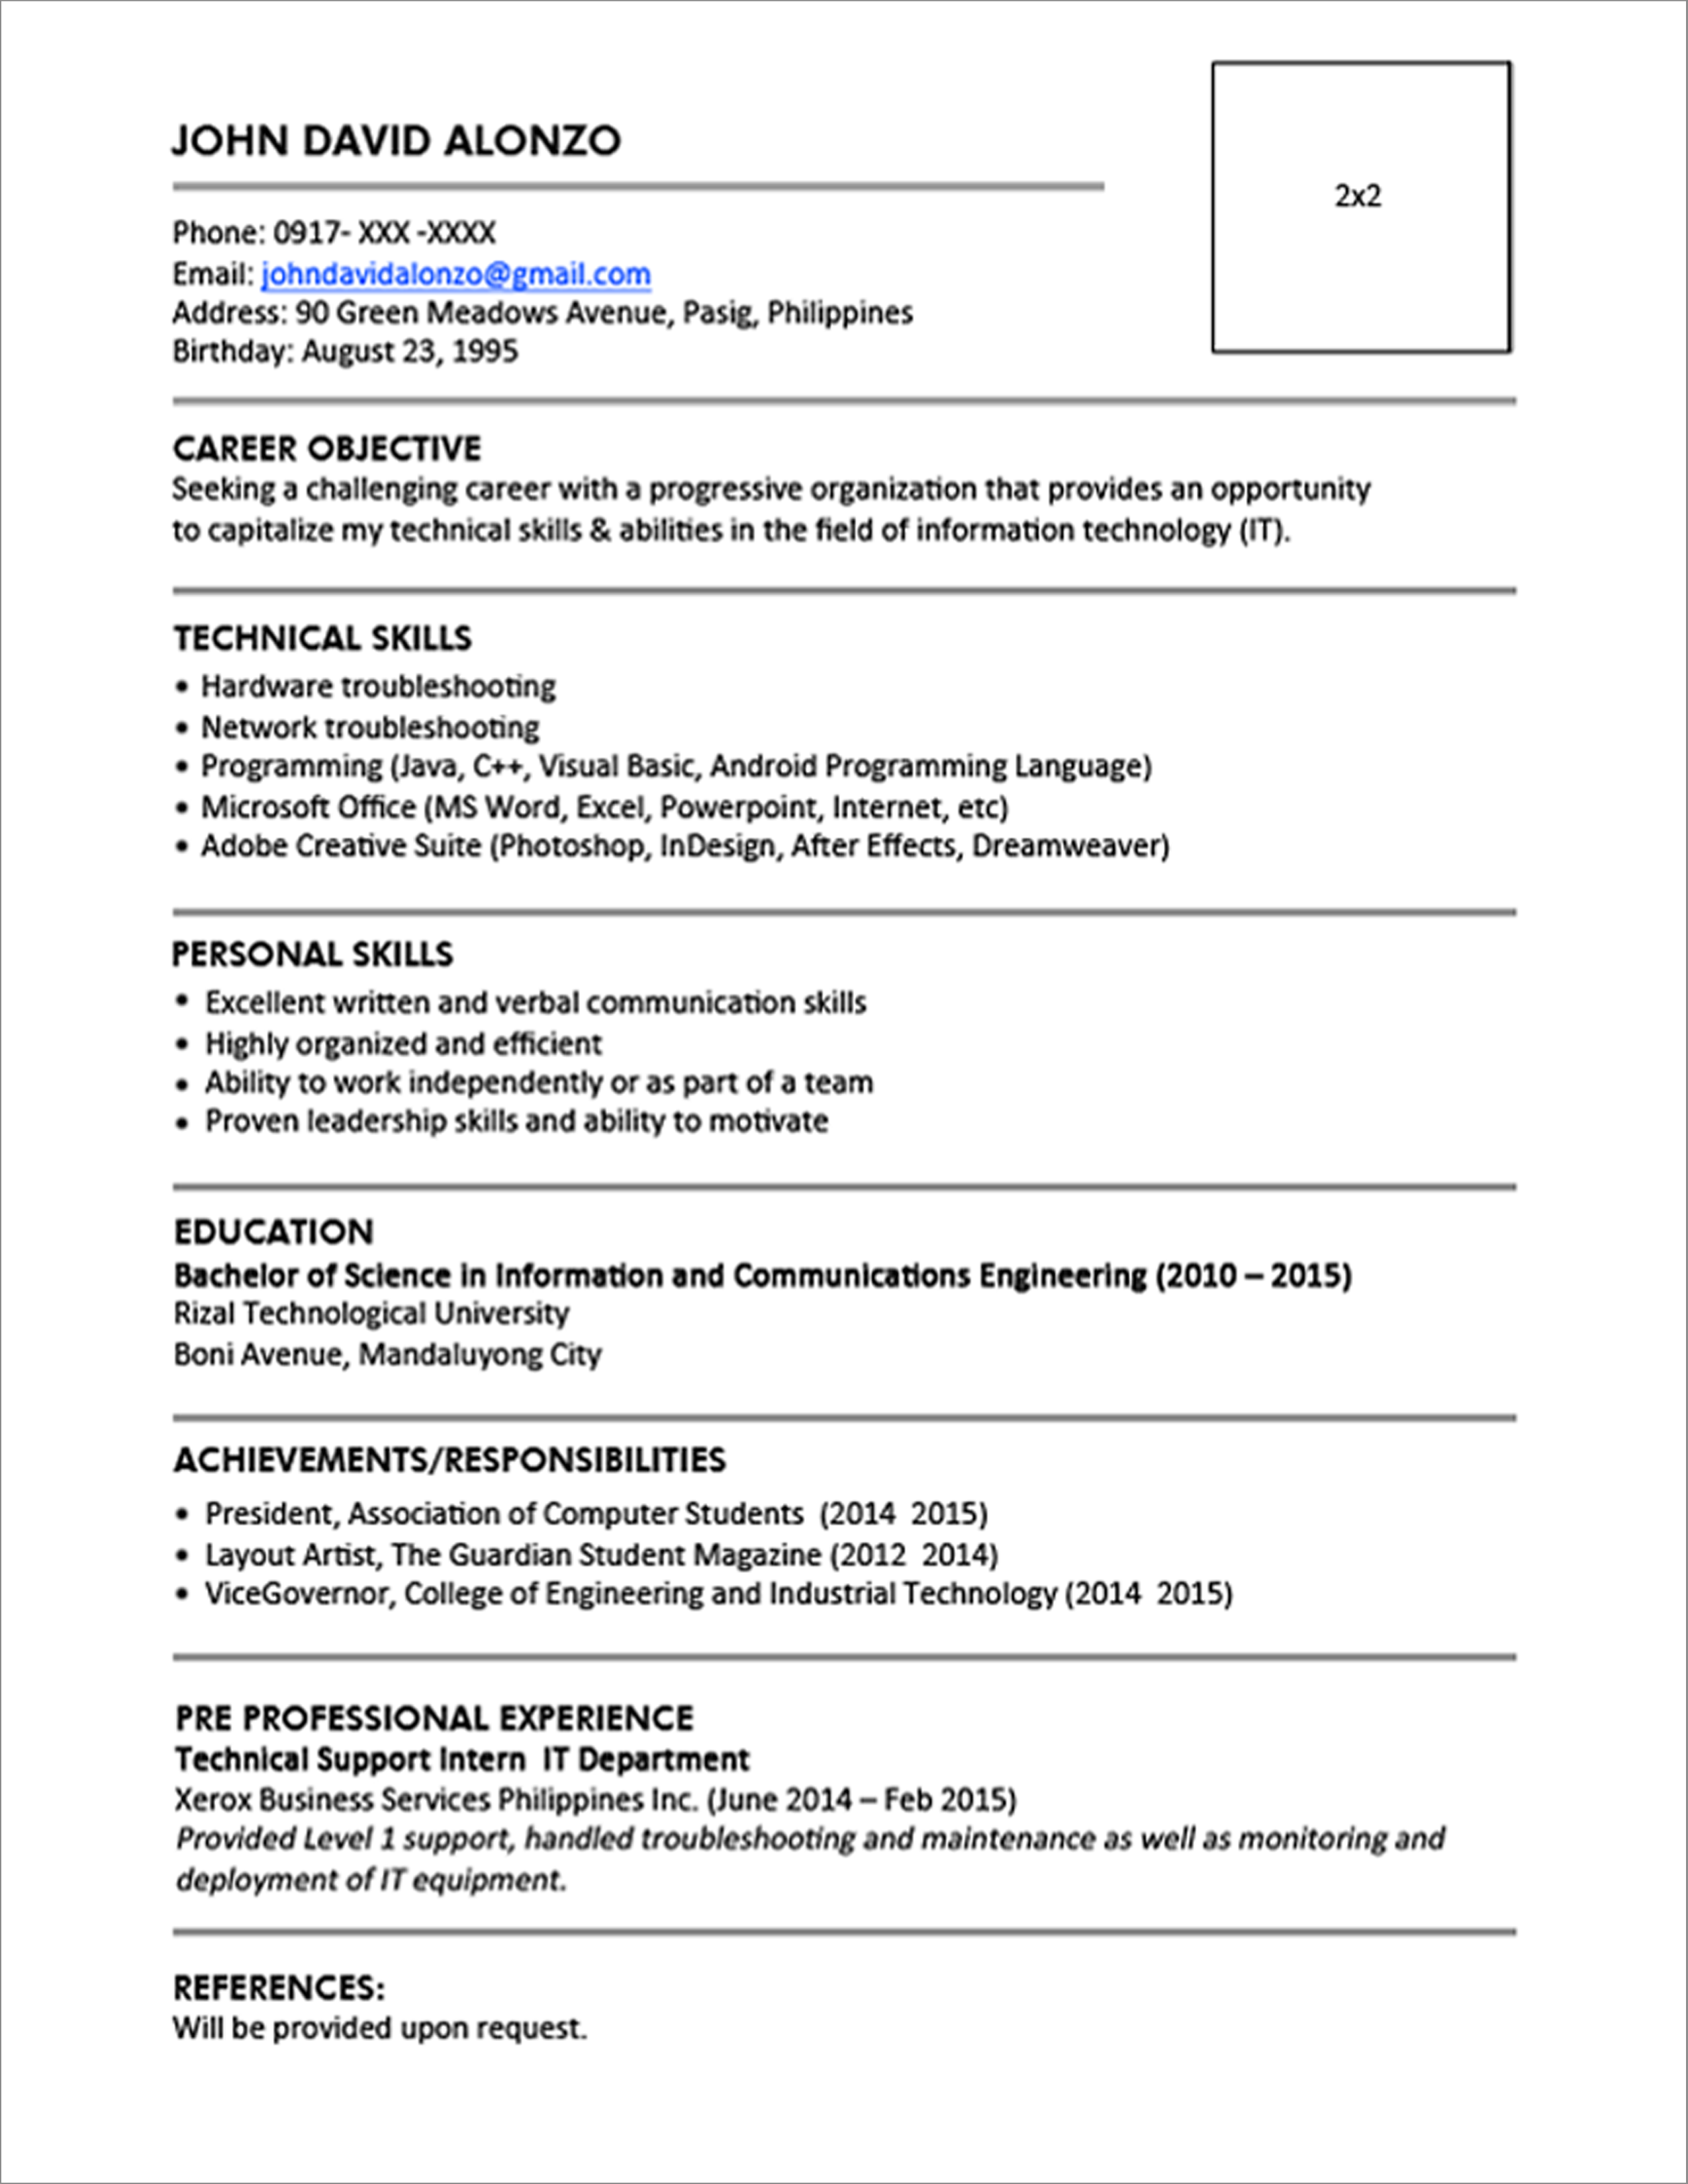 Objective On A Resume Sample Resume Format For Fresh Graduates Single Page 13 objective on a resume|wikiresume.com